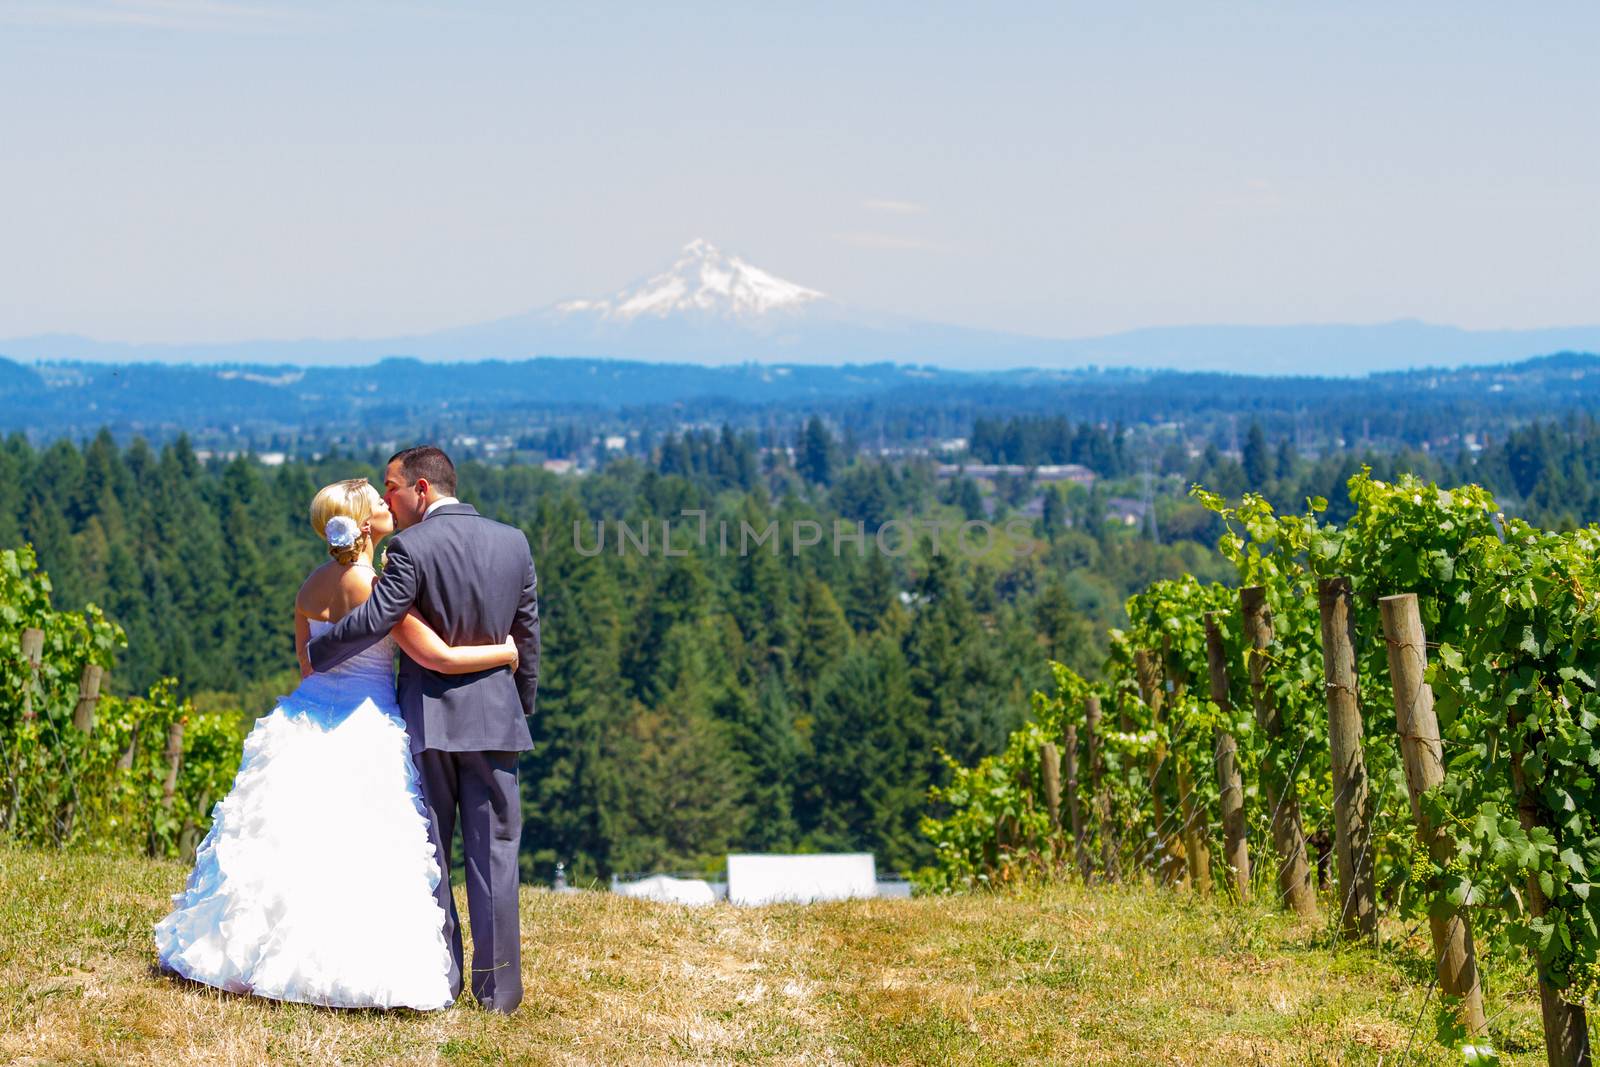 Bride and Groom with Fabulous View by joshuaraineyphotography